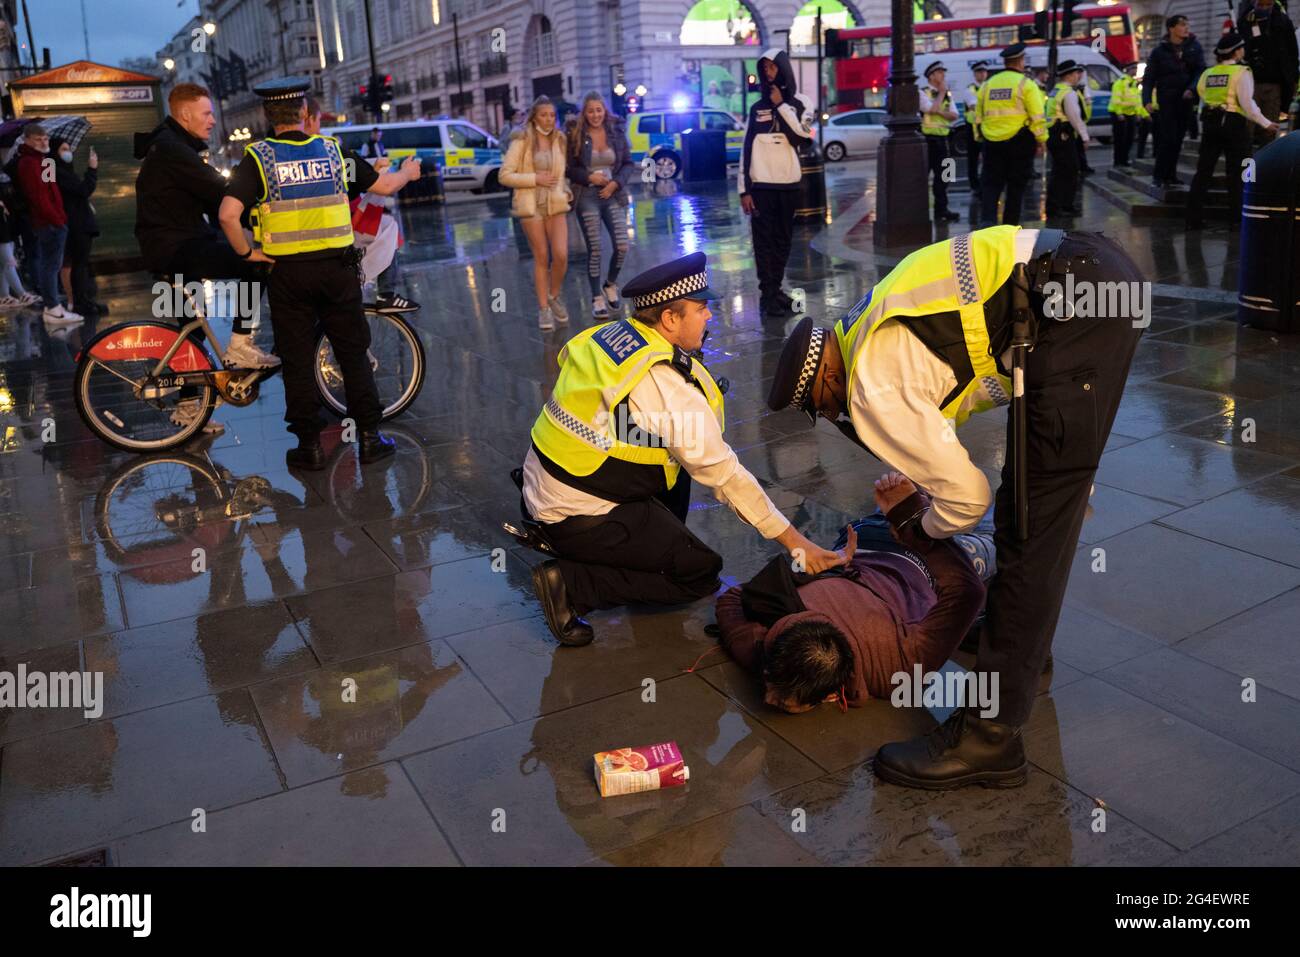 English football fans arrested in the West End, Central London ahead of the EURO20 match against Scotland. Stock Photo